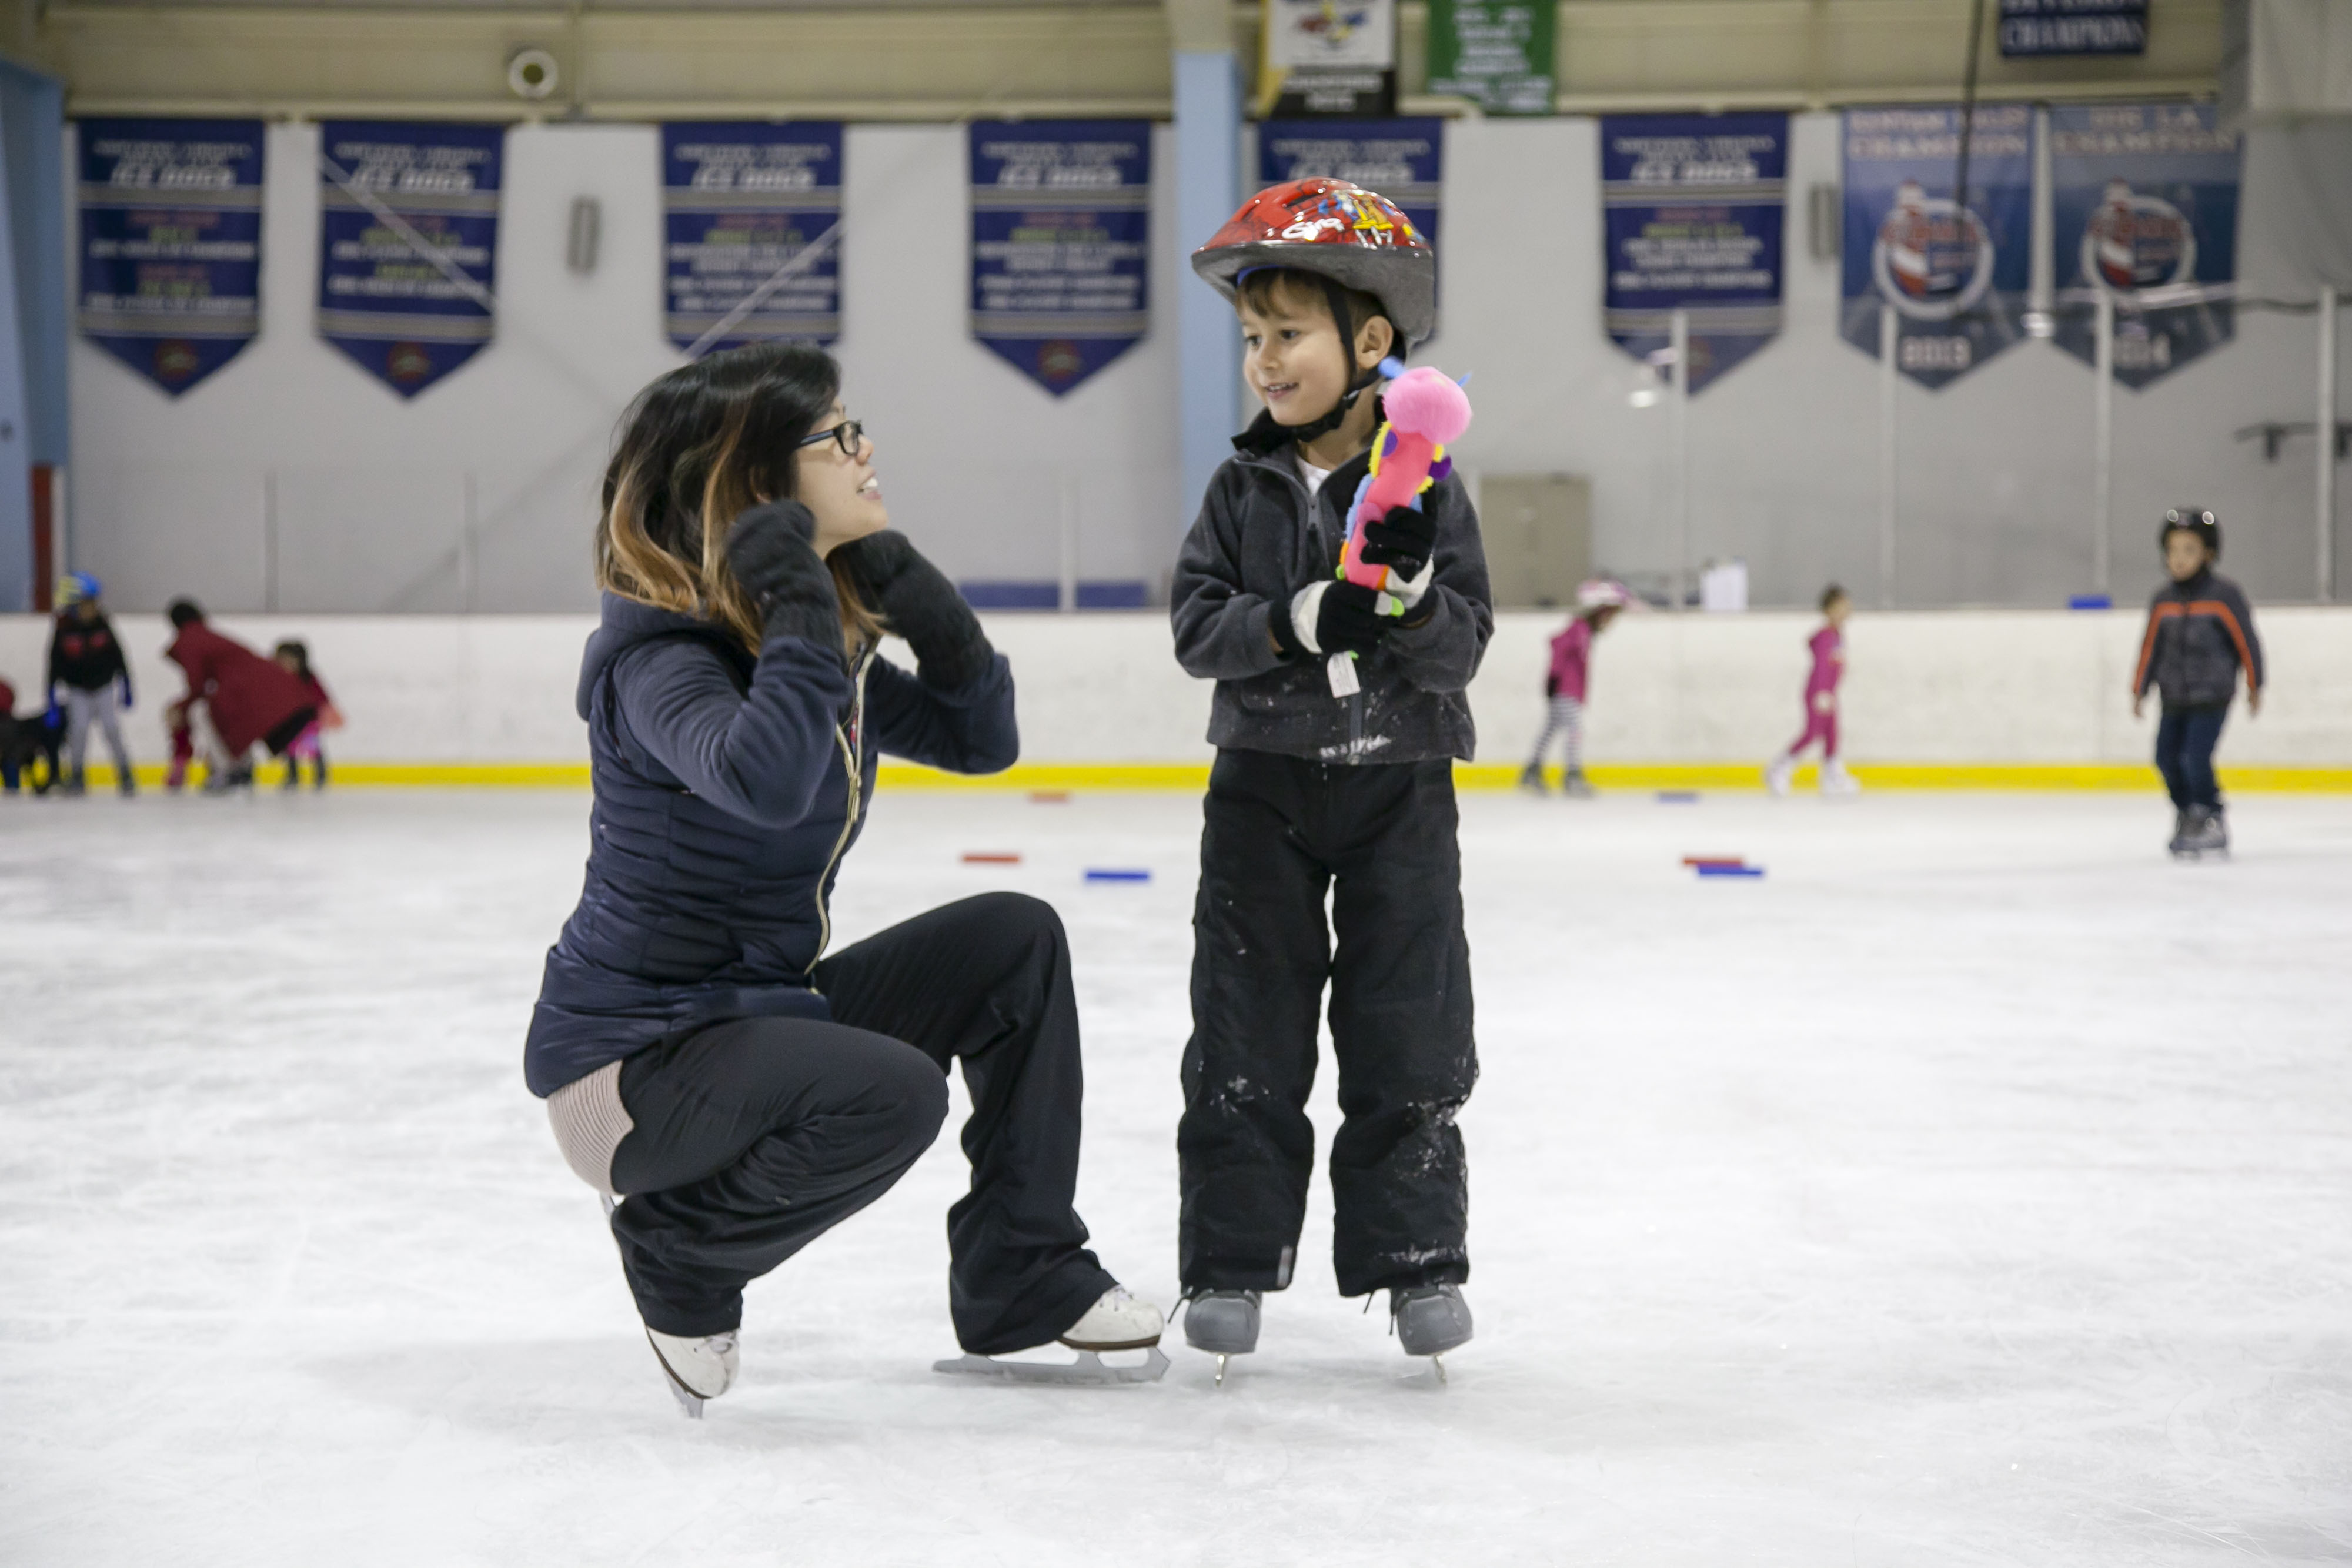 Coach conducting a private skating class to a student